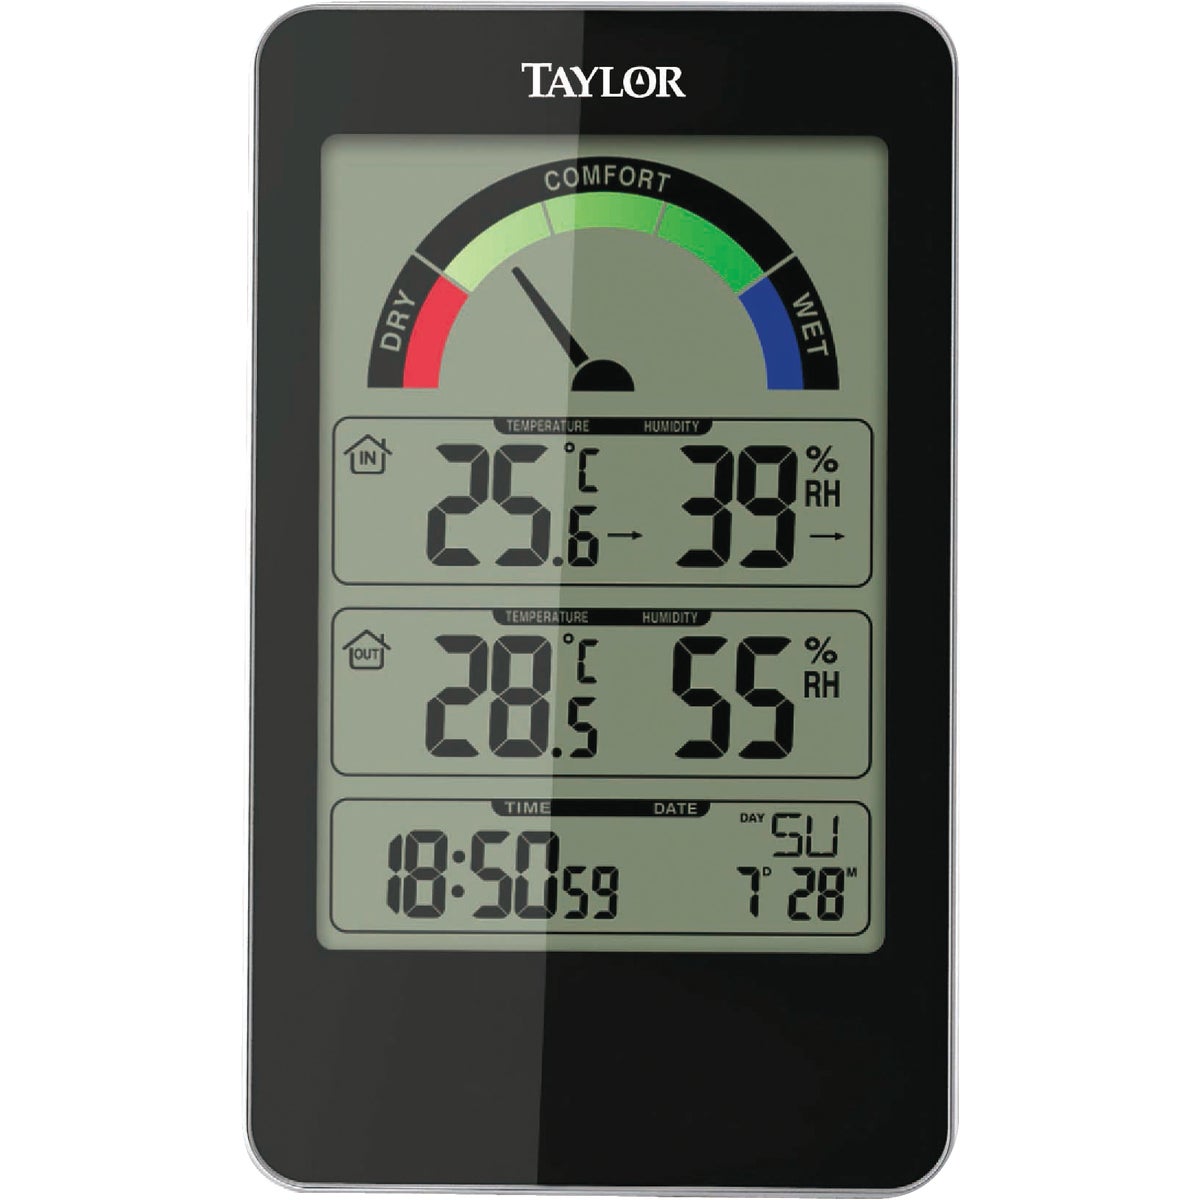 Item 652504, Taylor 1732 thermometer/hygrometer constantly monitors the temperature and 